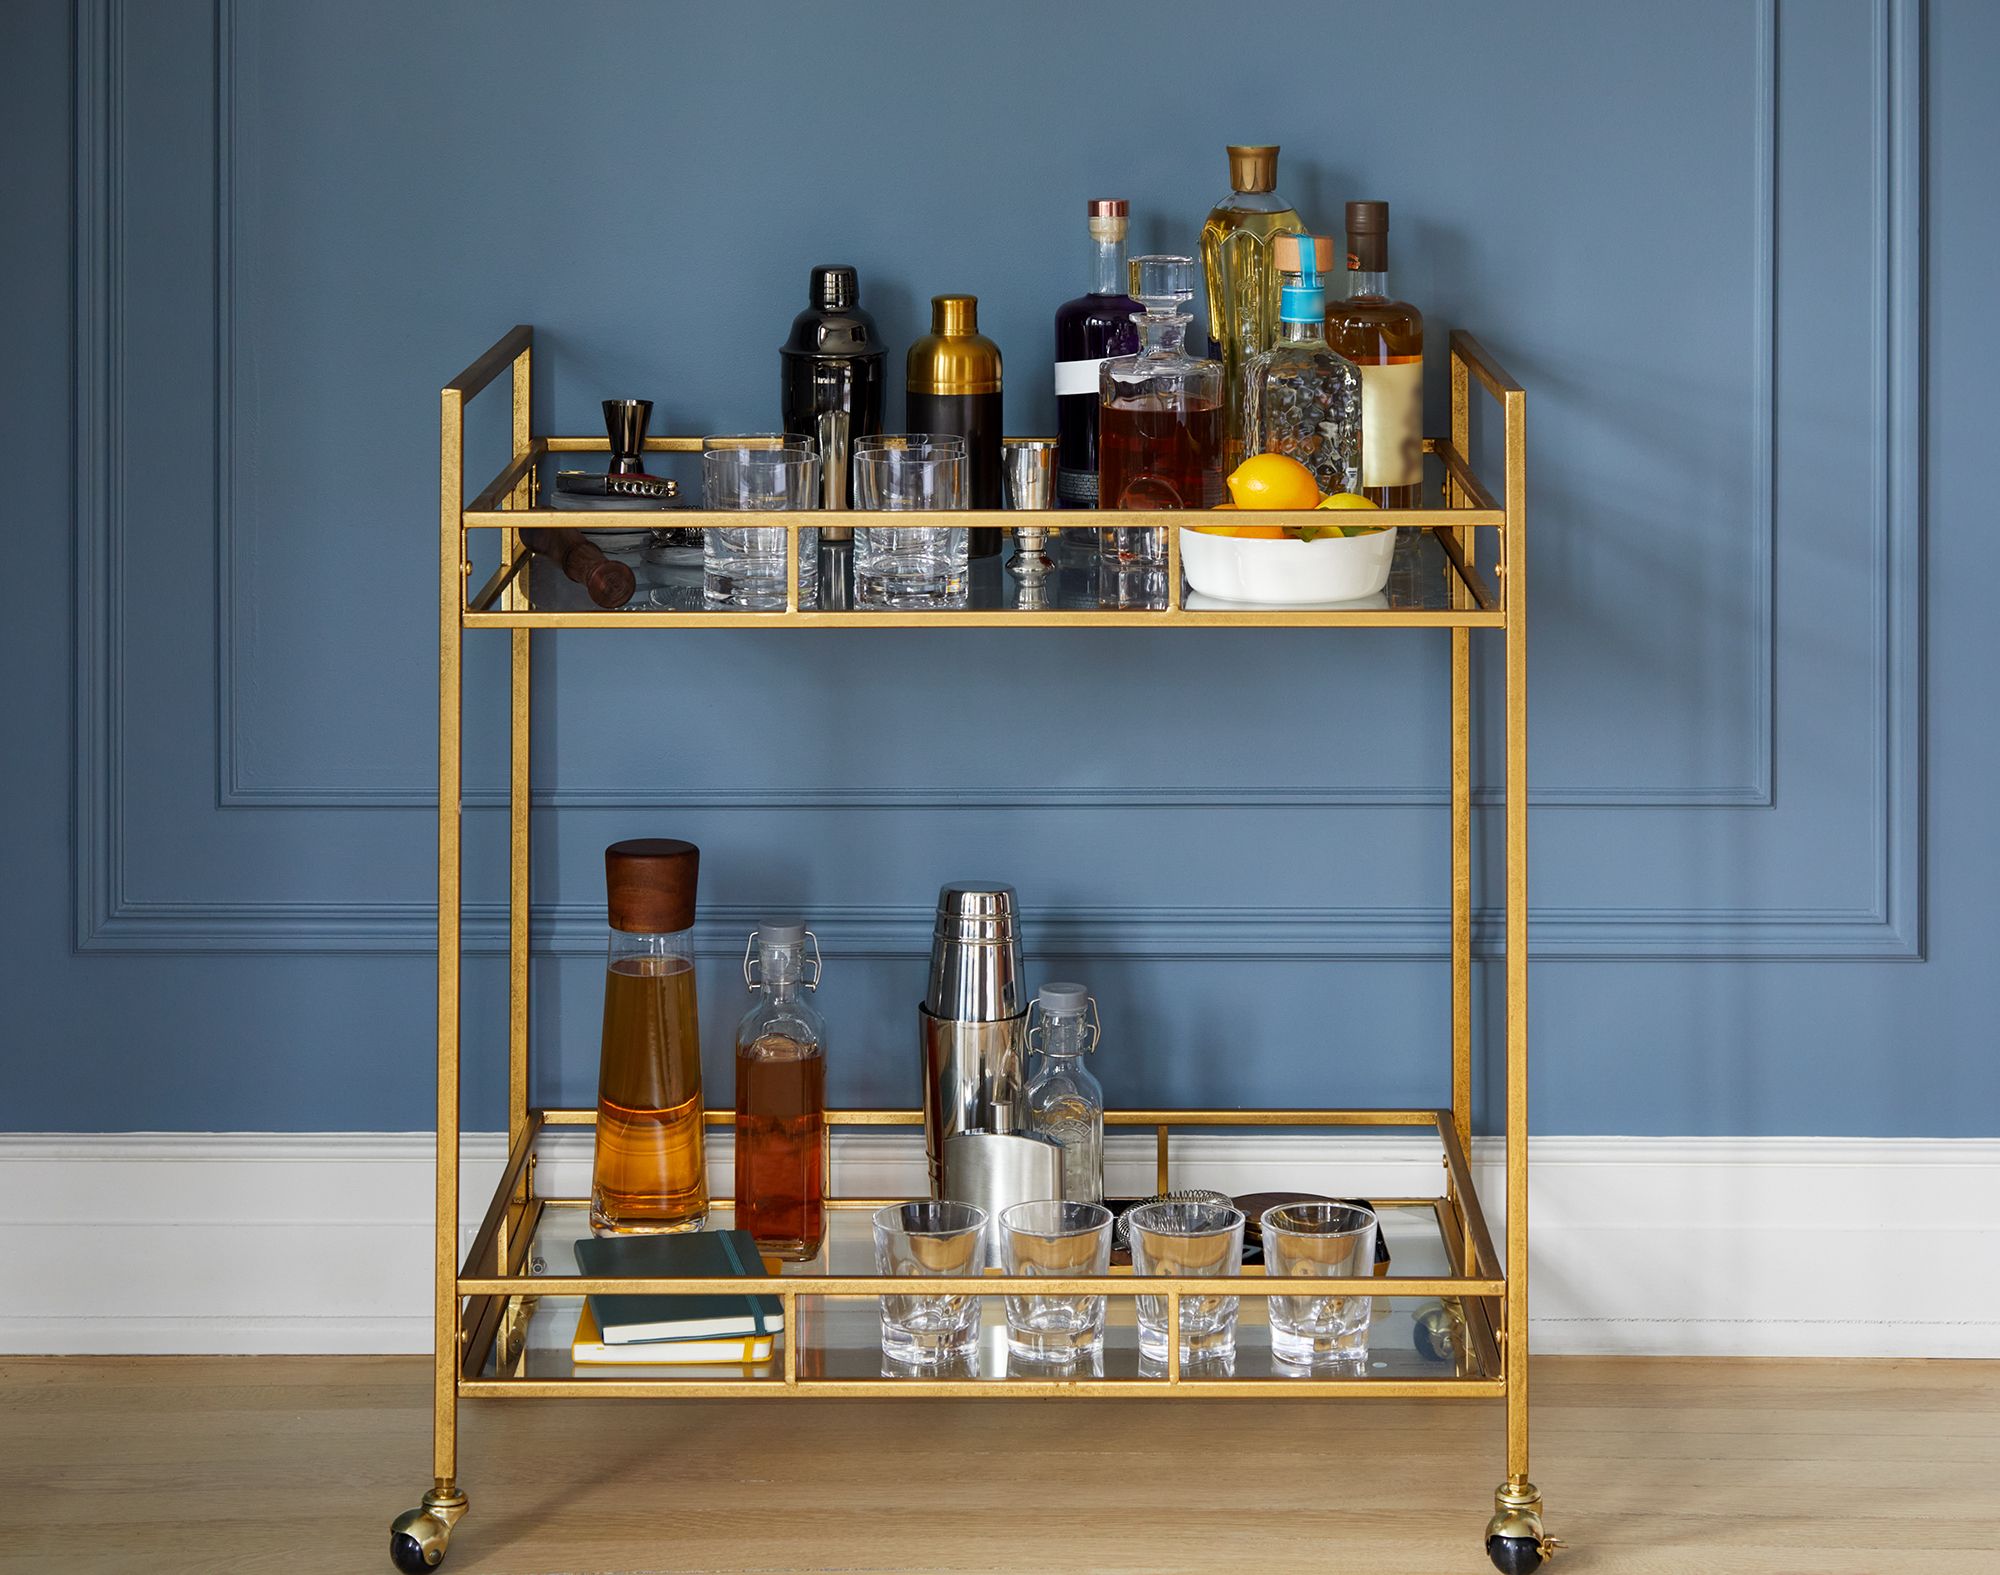 Bar Essentials for a Well-Stocked Home Bar